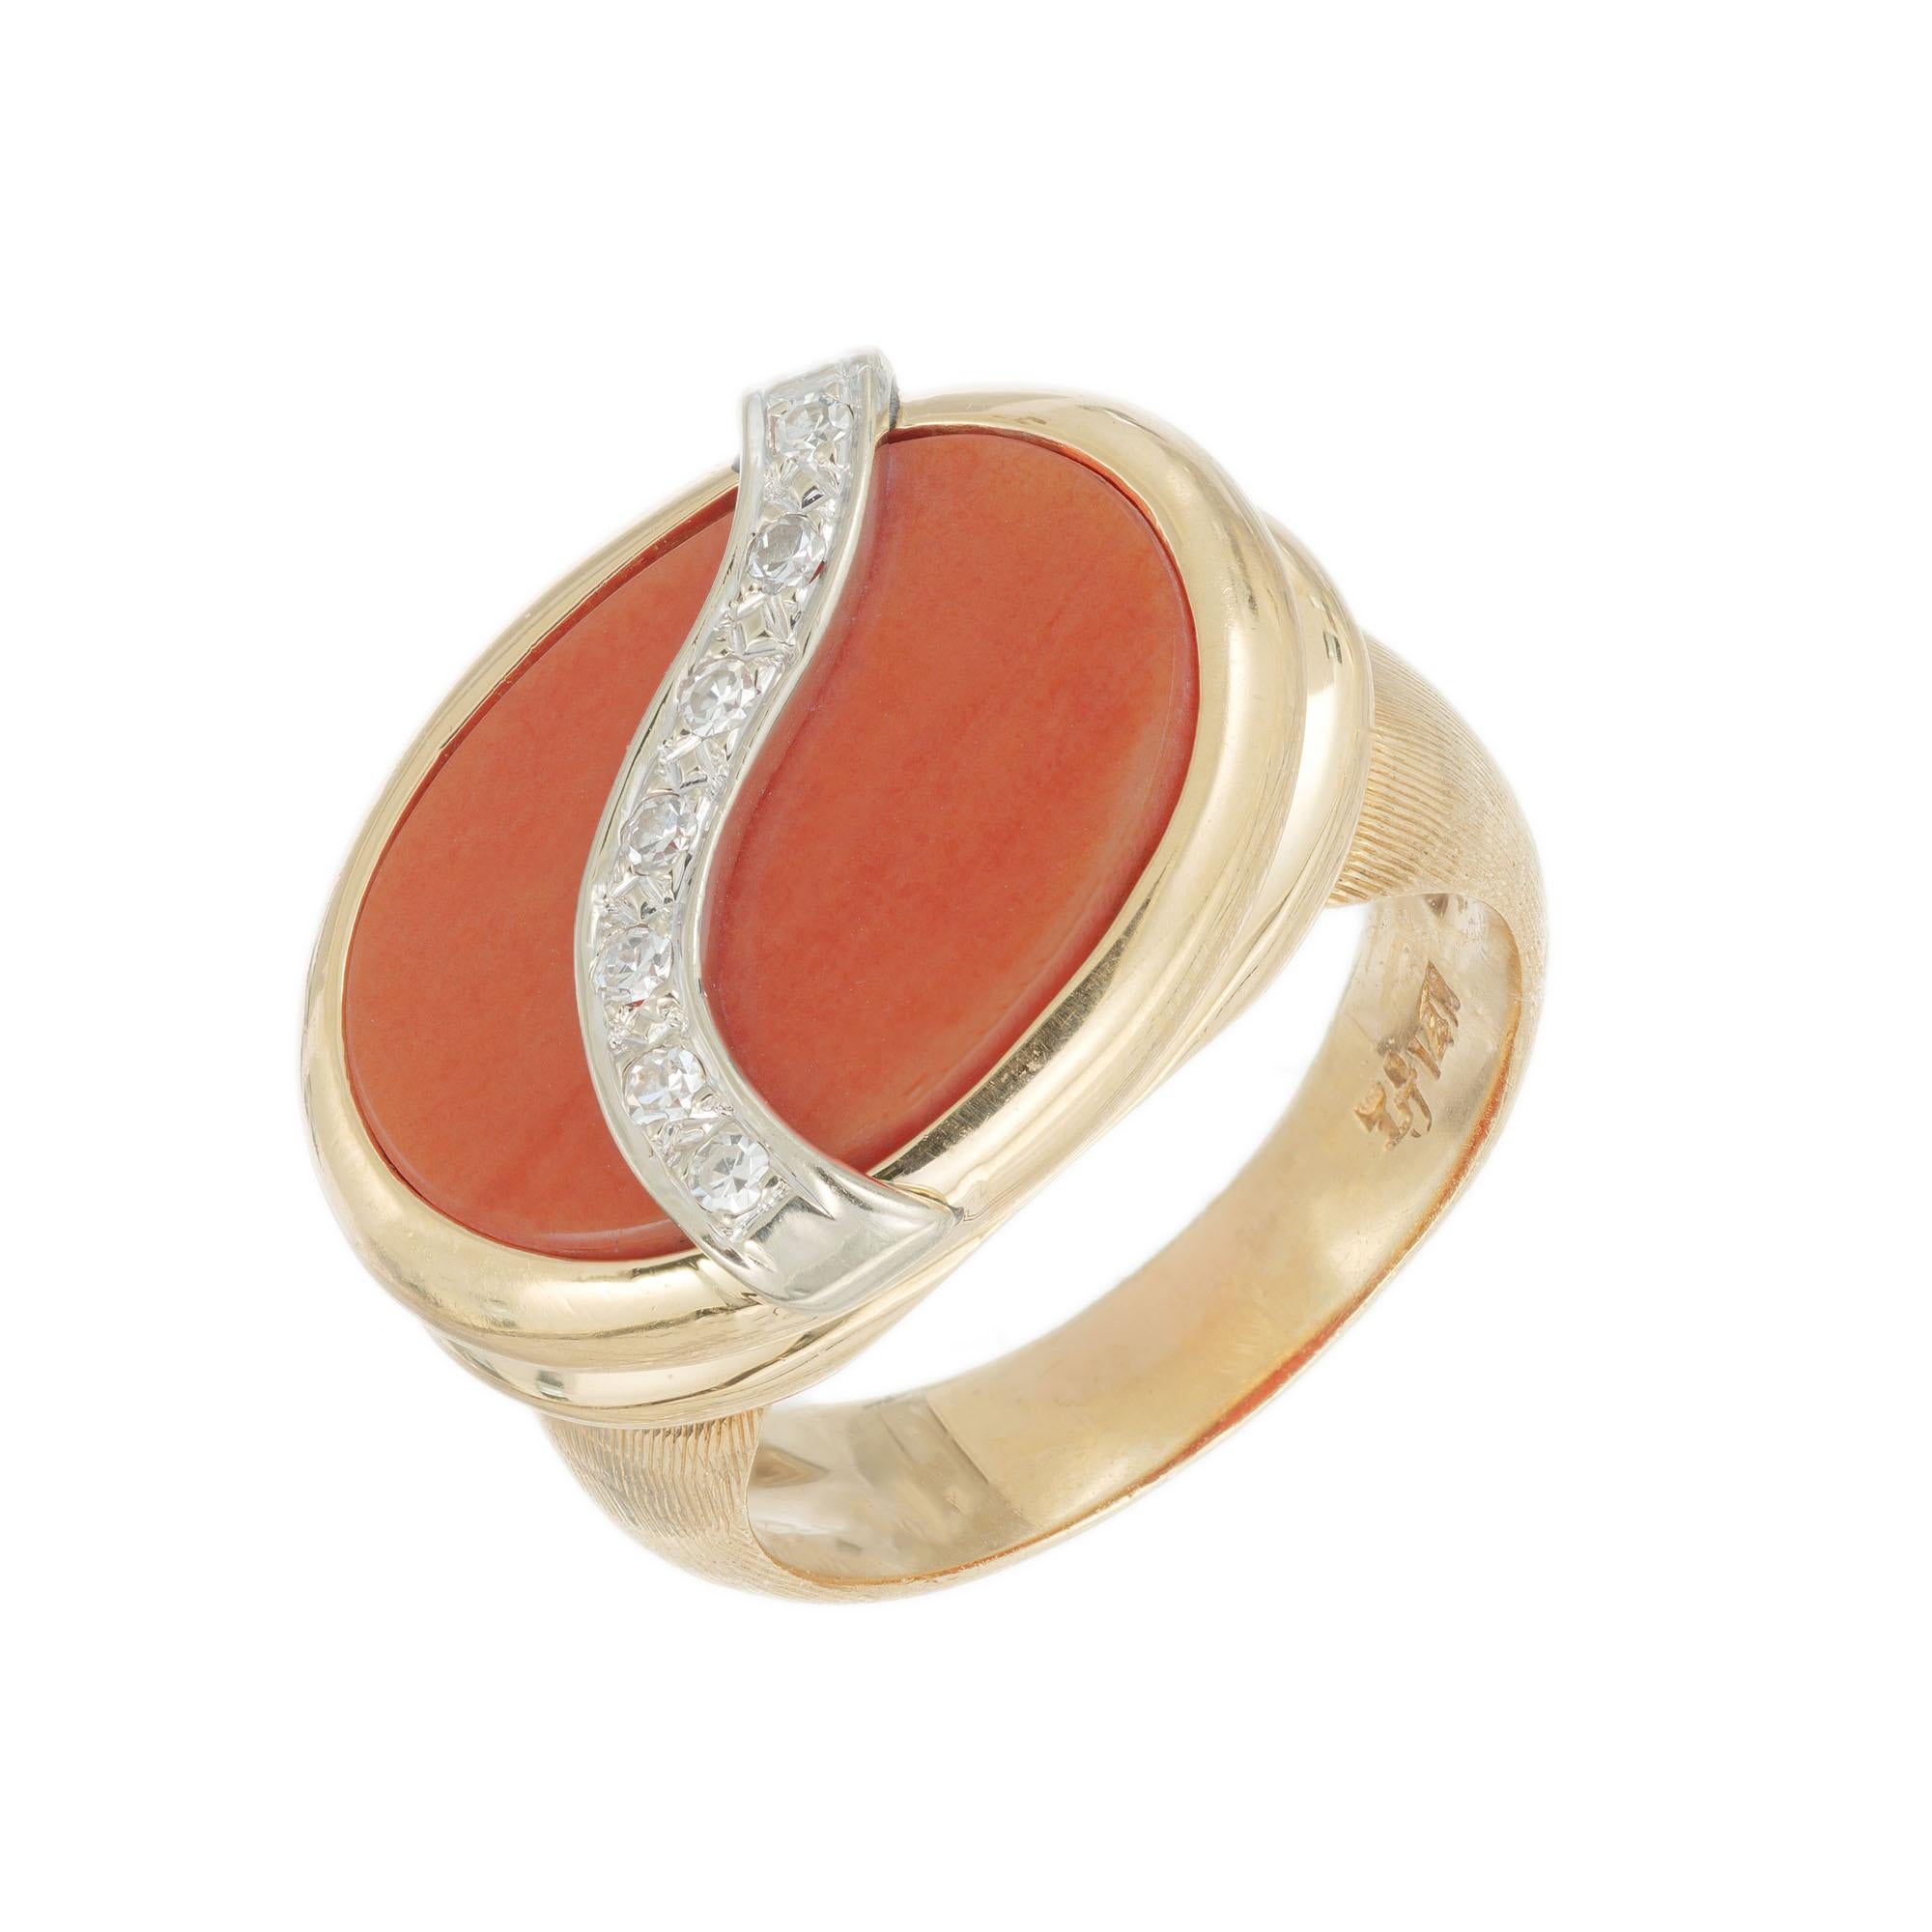 Mid-Century 1960's Salmon coral and diamond cocktail ring. Genuine untreated Salmon oval coral set in 14k yellow gold with a 14k white gold swirl accented with 7 single cut diamonds. 

1 Genuine untreated oval Salmon color coral 17.5 x 12.5mm
7